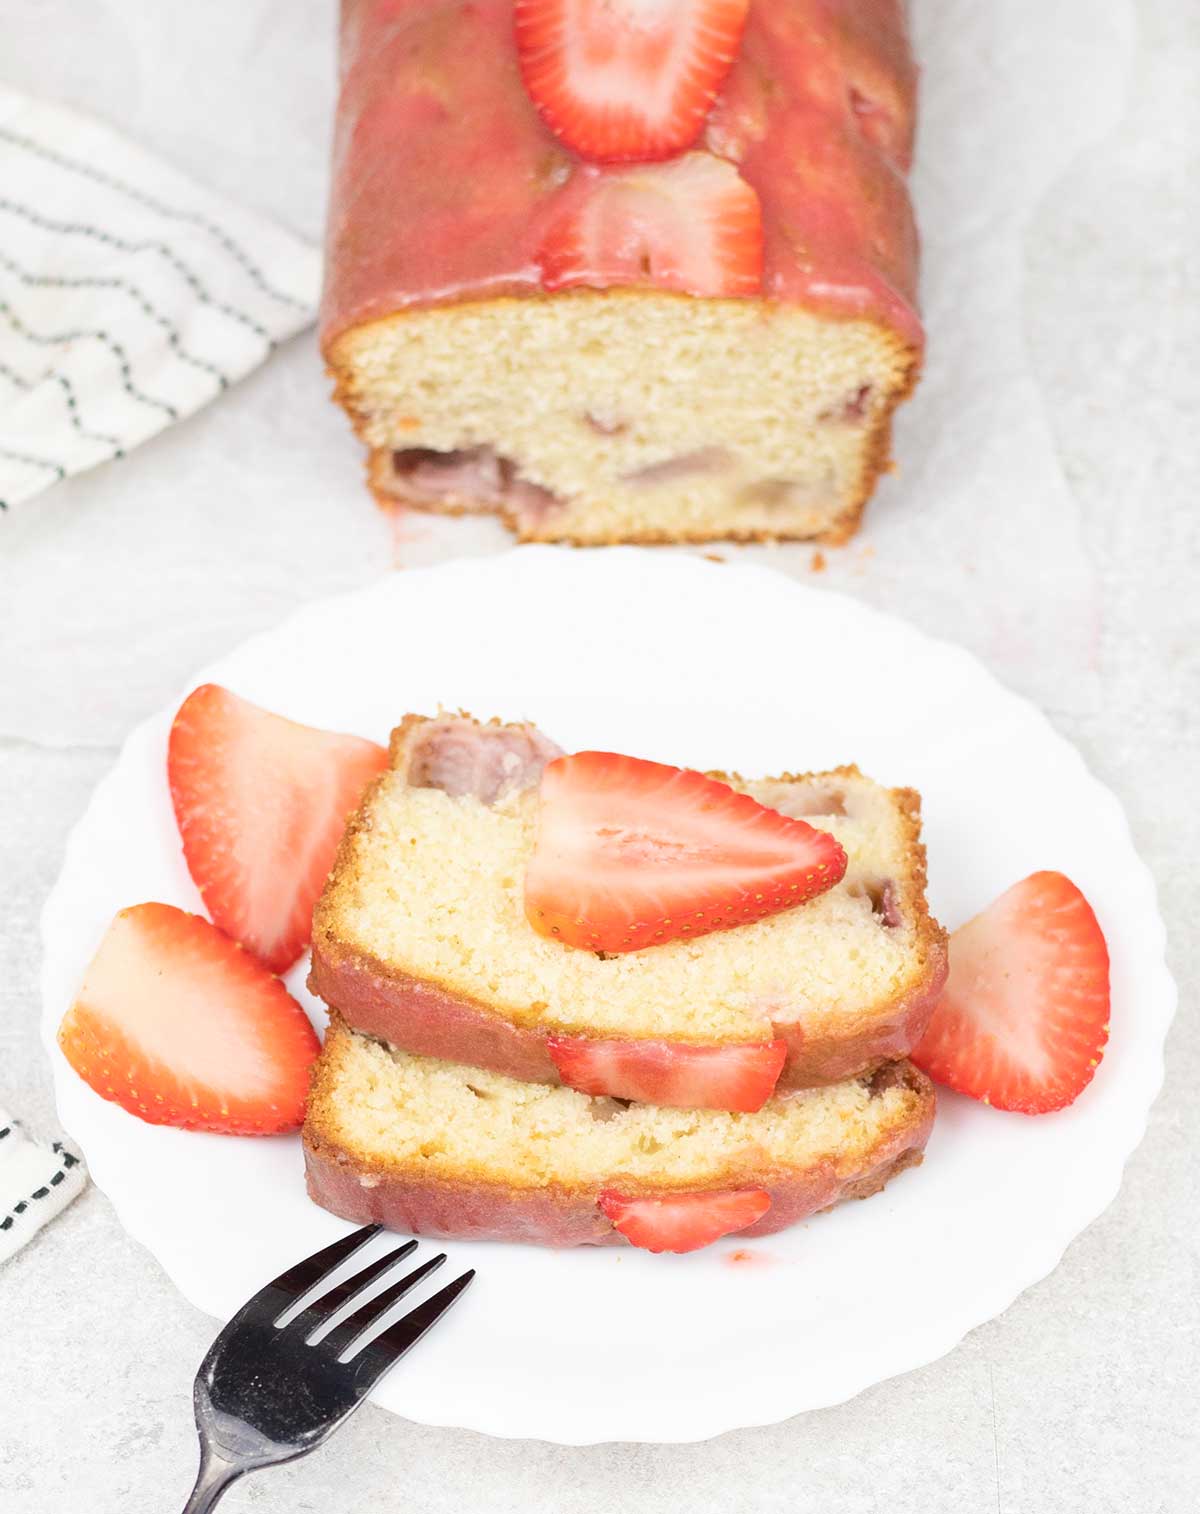 Slices of strawberry loaf cake topped with some fresh strawberries glaze.